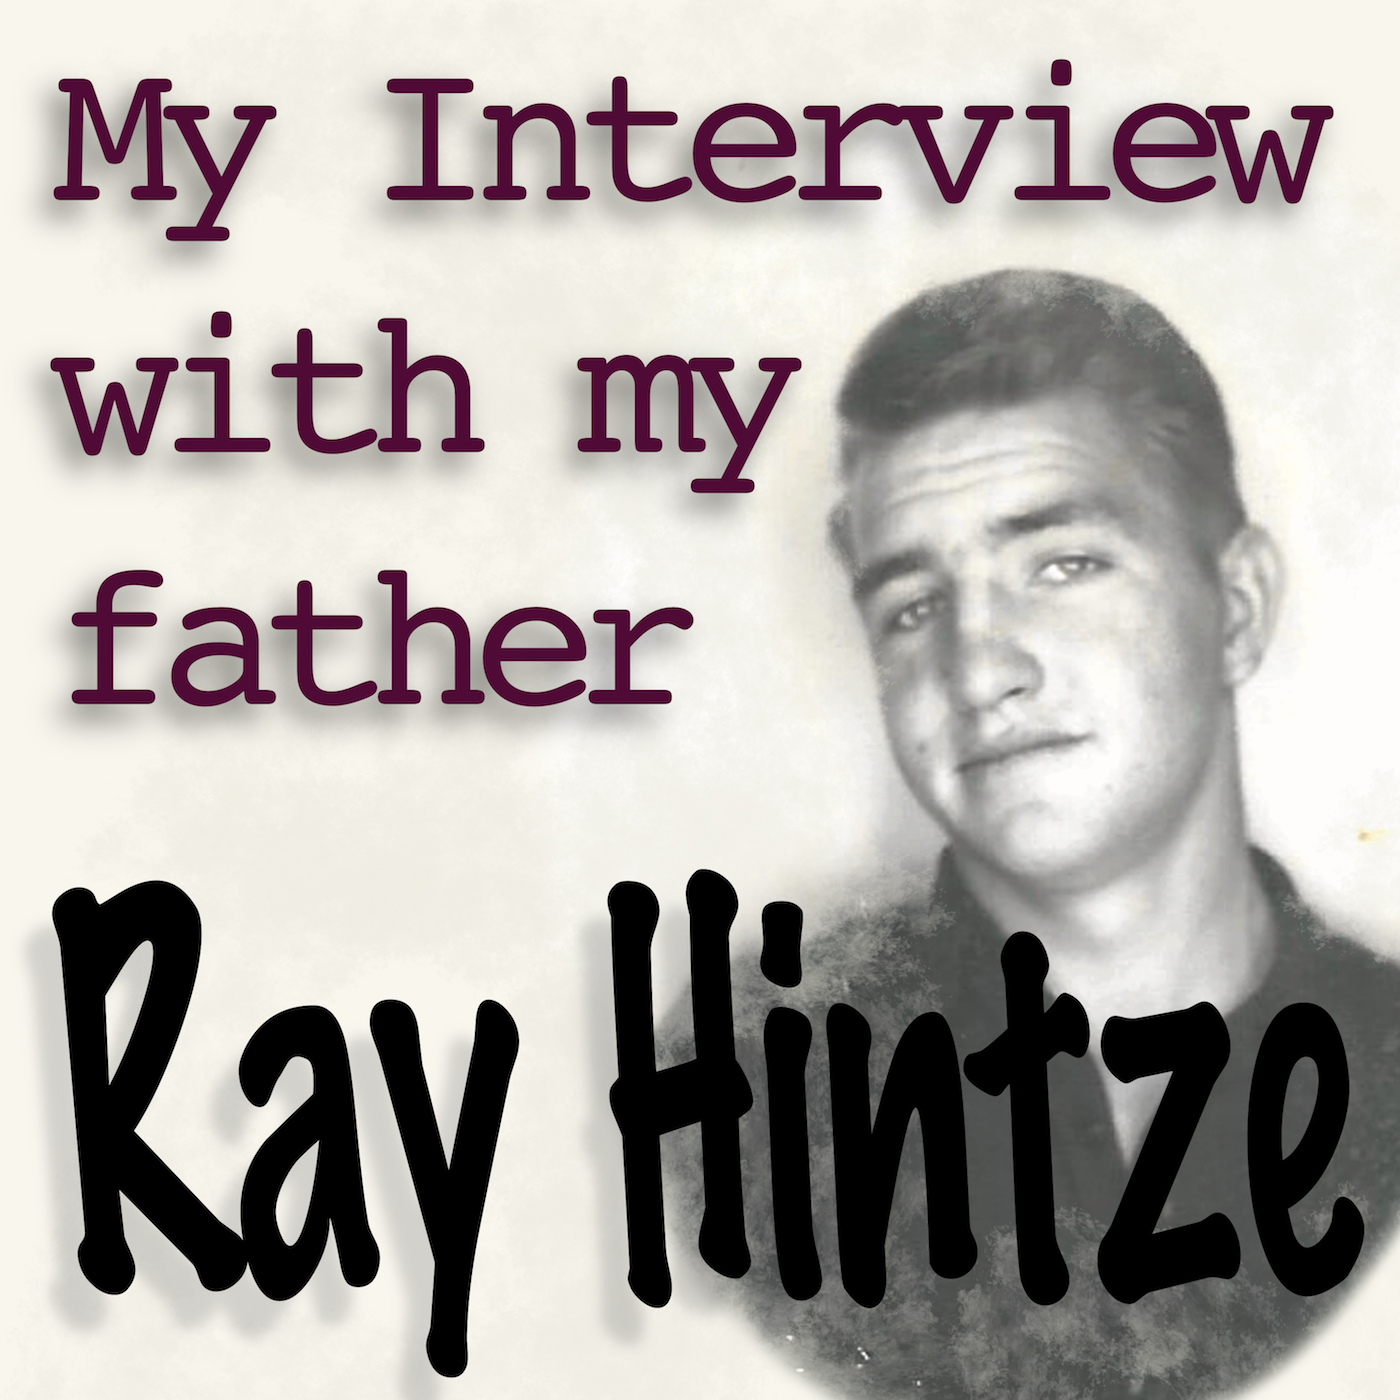 My Interview with My Father: Ray Hintze